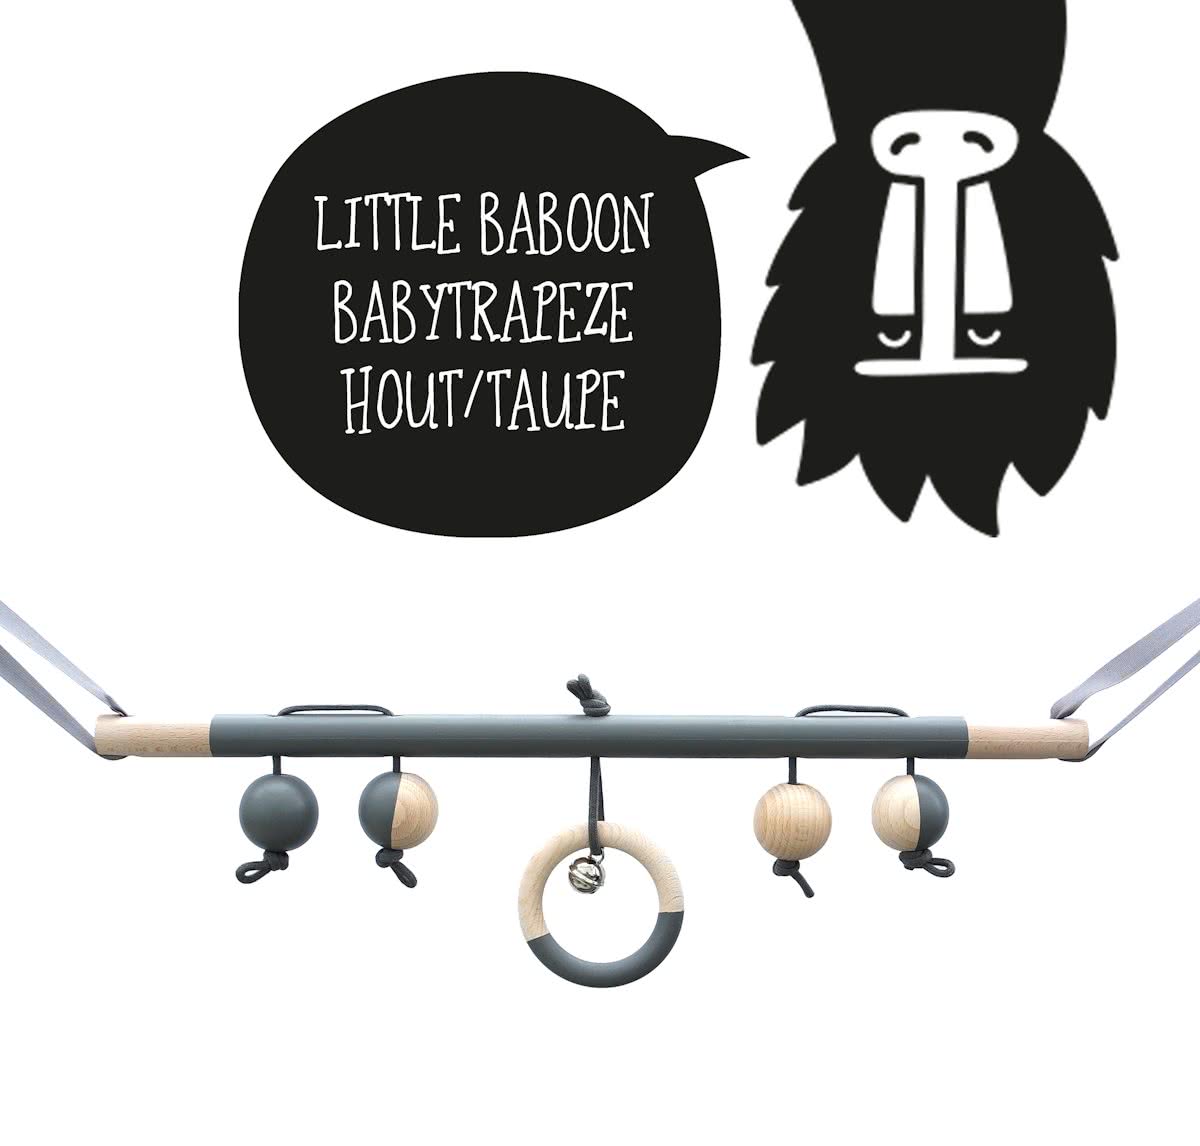 Babytrapeze / babygym hout met taupe grijs